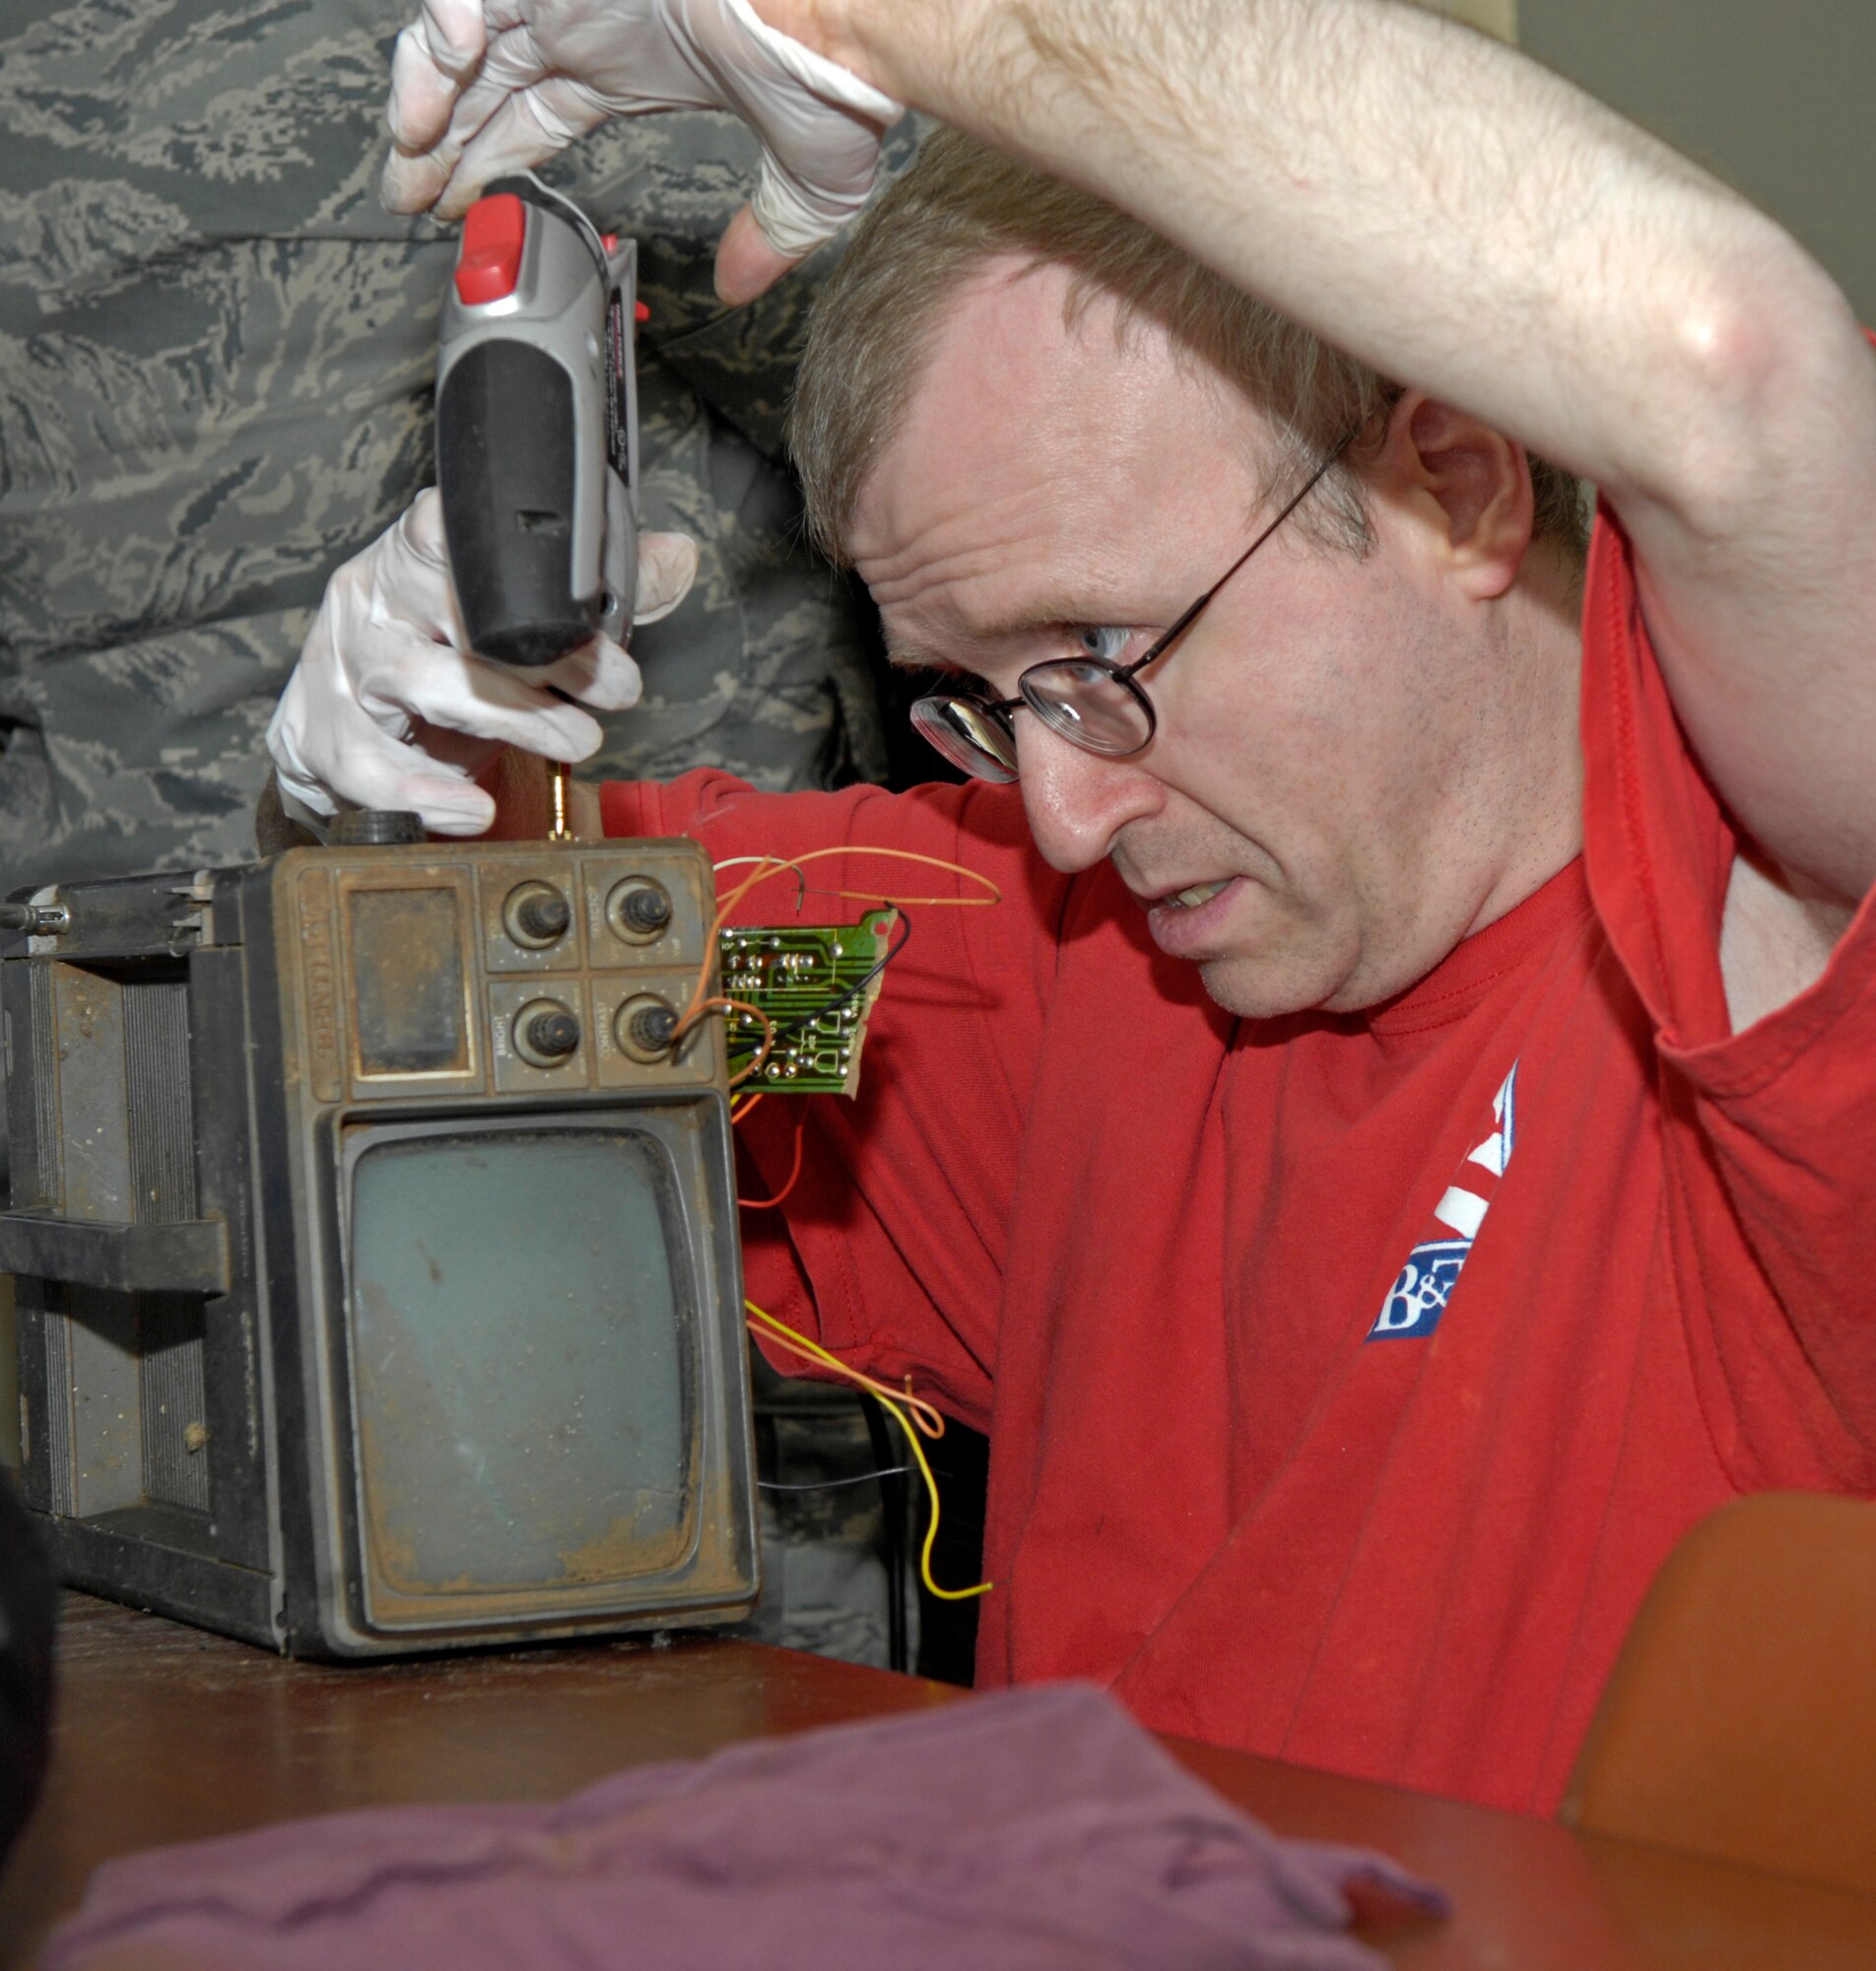 As a client repairs parts on a television radio, he is able to work in a safe environment thanks to the Handicap are Producers house located on the east side of base. (Senior Airman Alexandra M. Sandoval/U.S. Air Force)